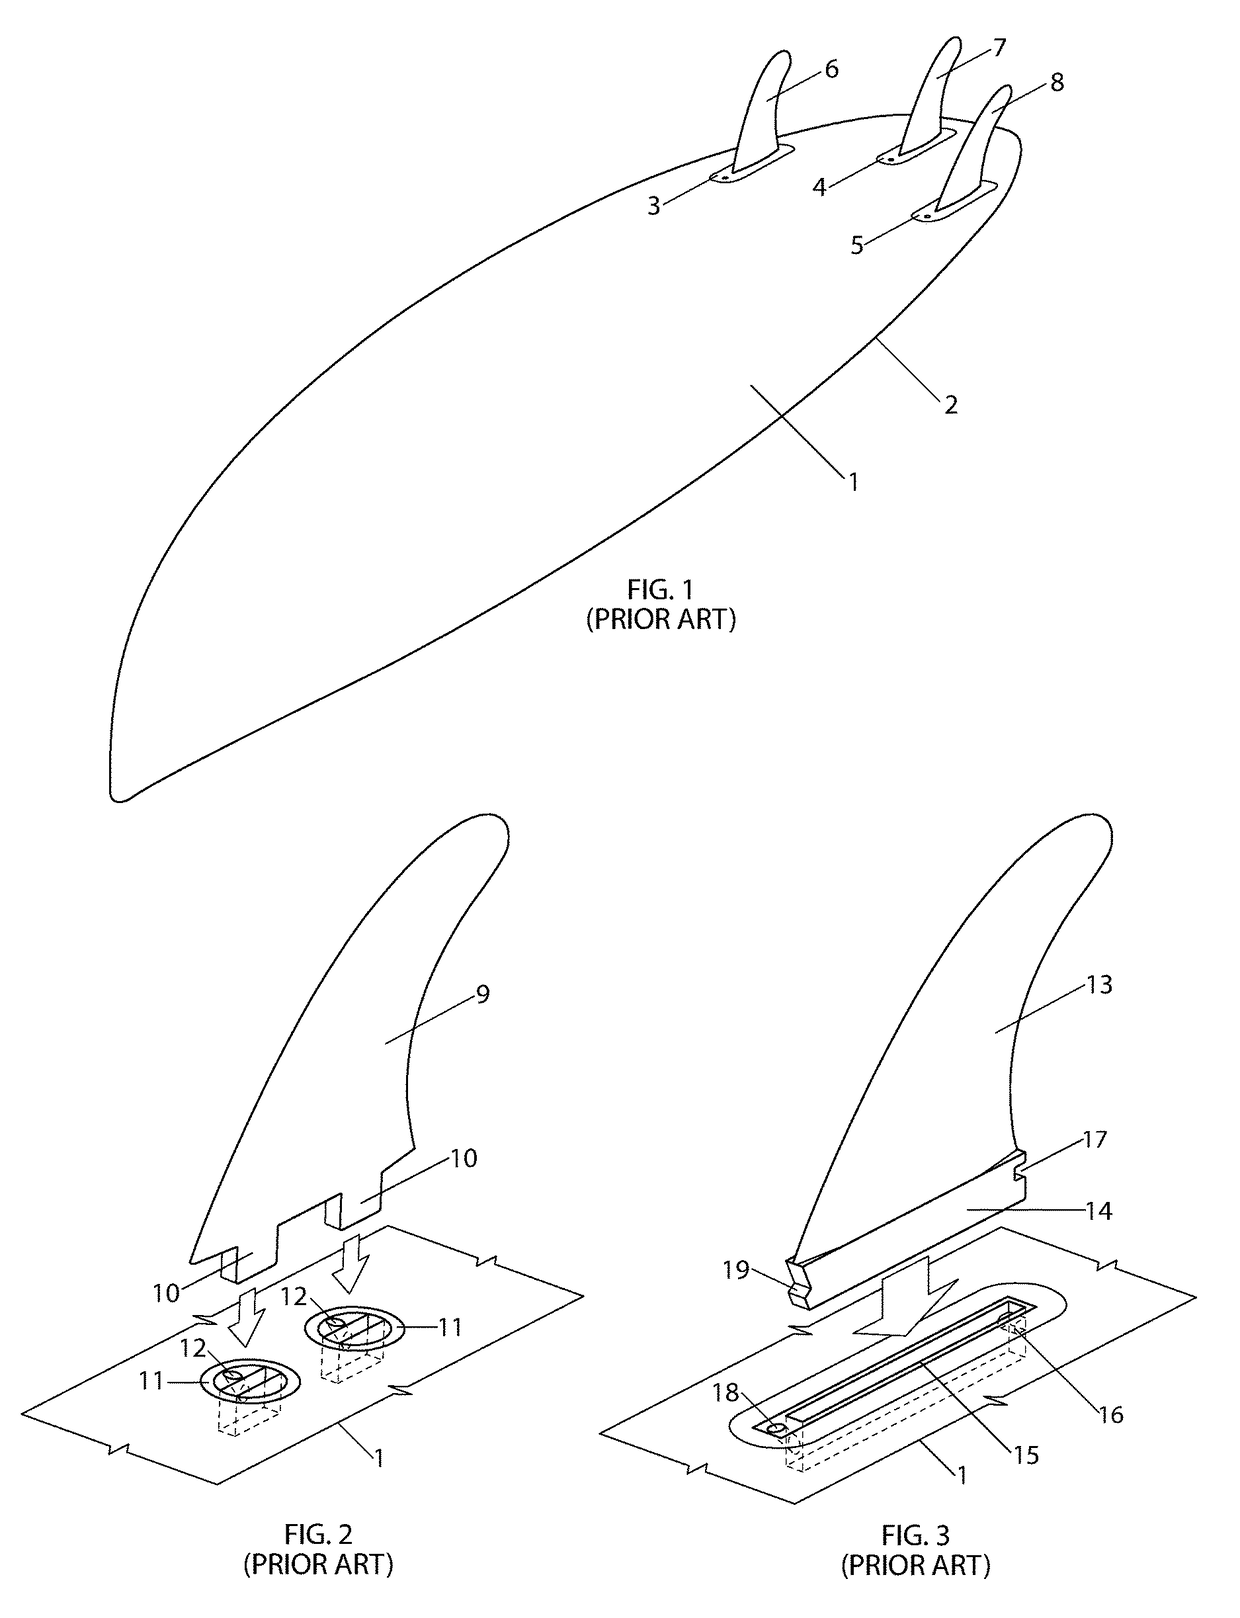 Adapter for the insert of two-tabbed fins into single-tabbed fin boxes of a surfboard